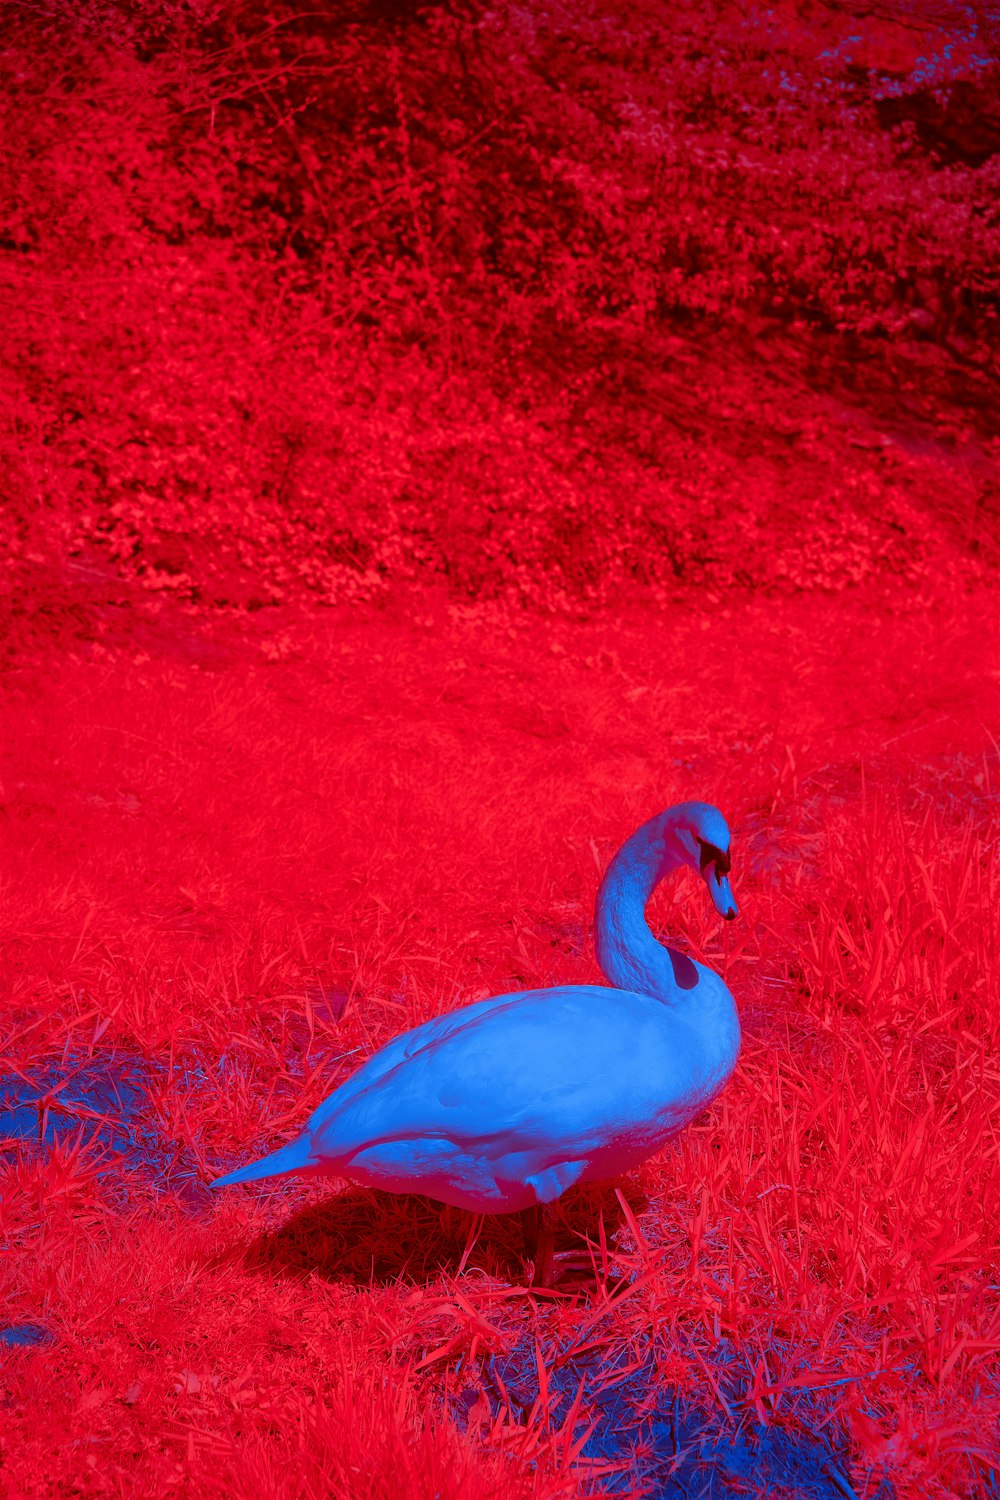 a blue bird standing on a red surface